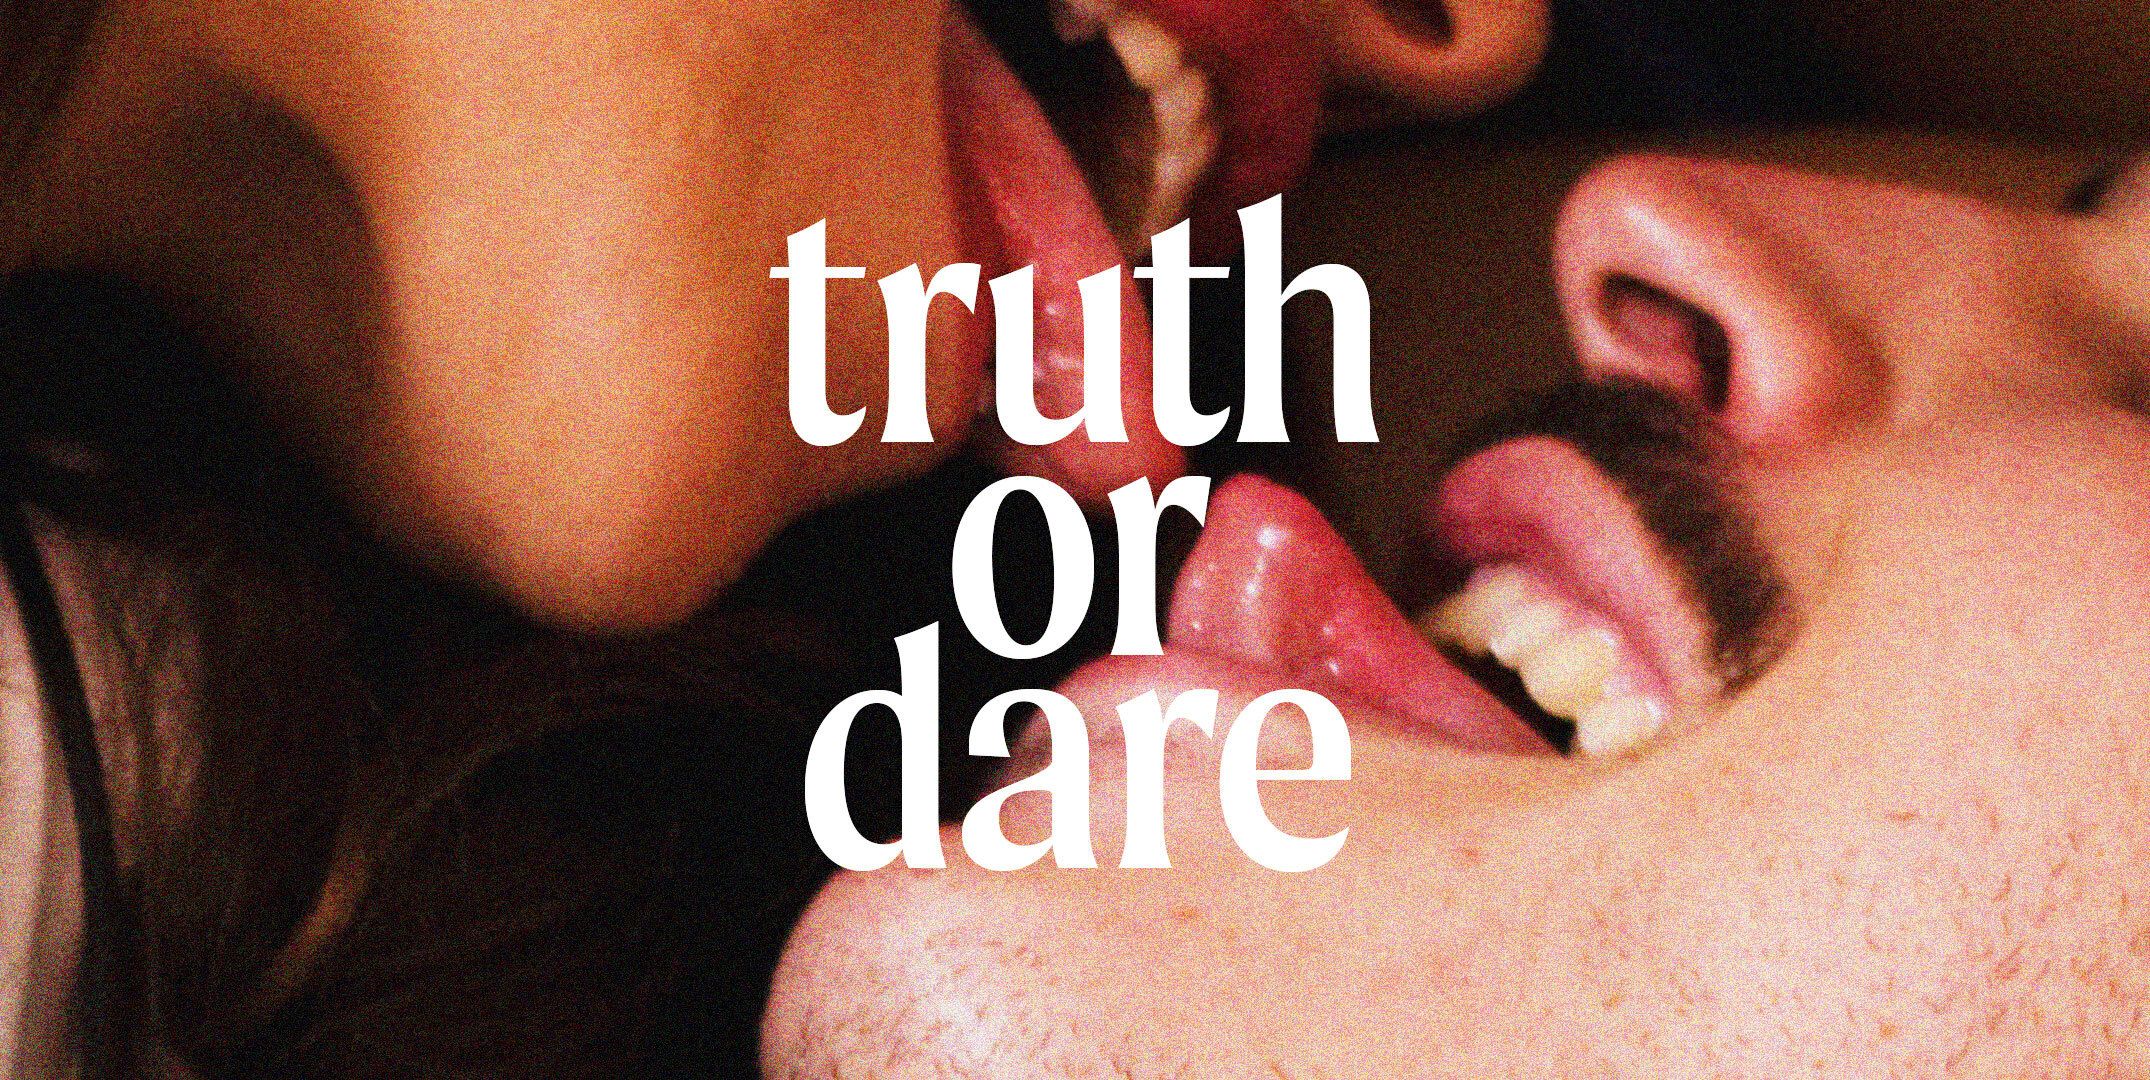 Naked truth or dare stories - xxx pics